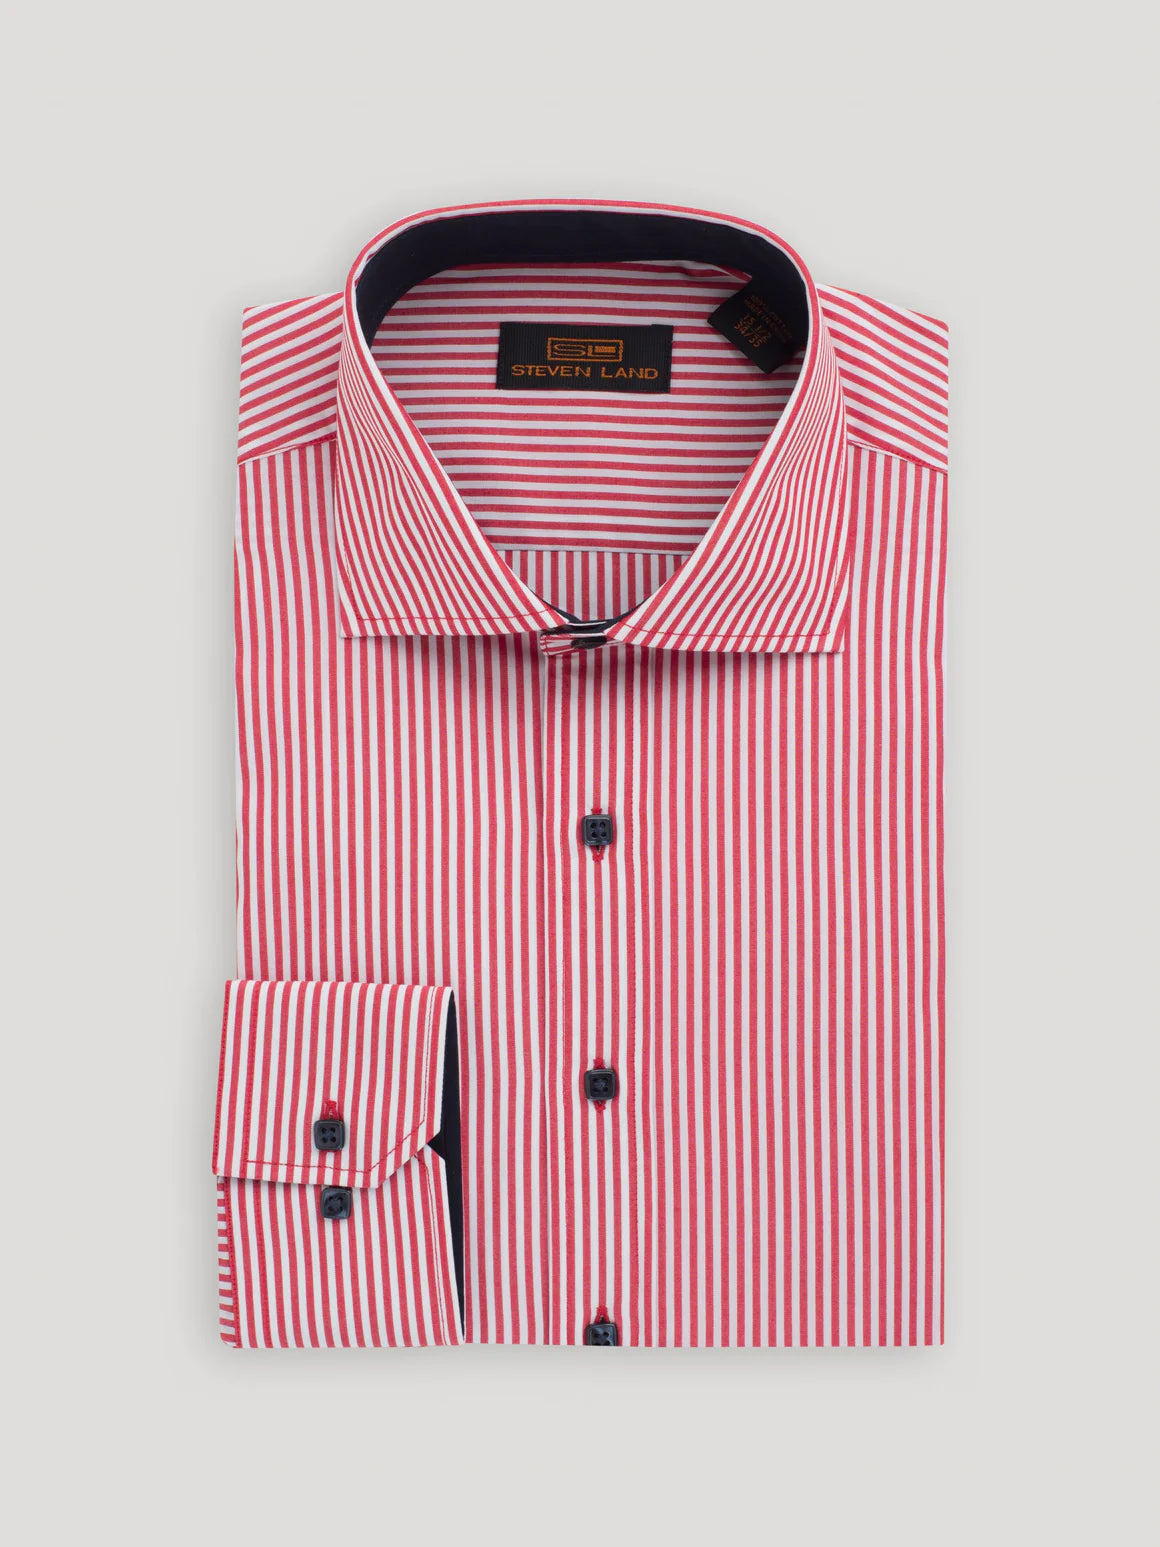 Steven Land Mens Classic Fit Red &amp; White Striped 100% Cotton Dress Shirt